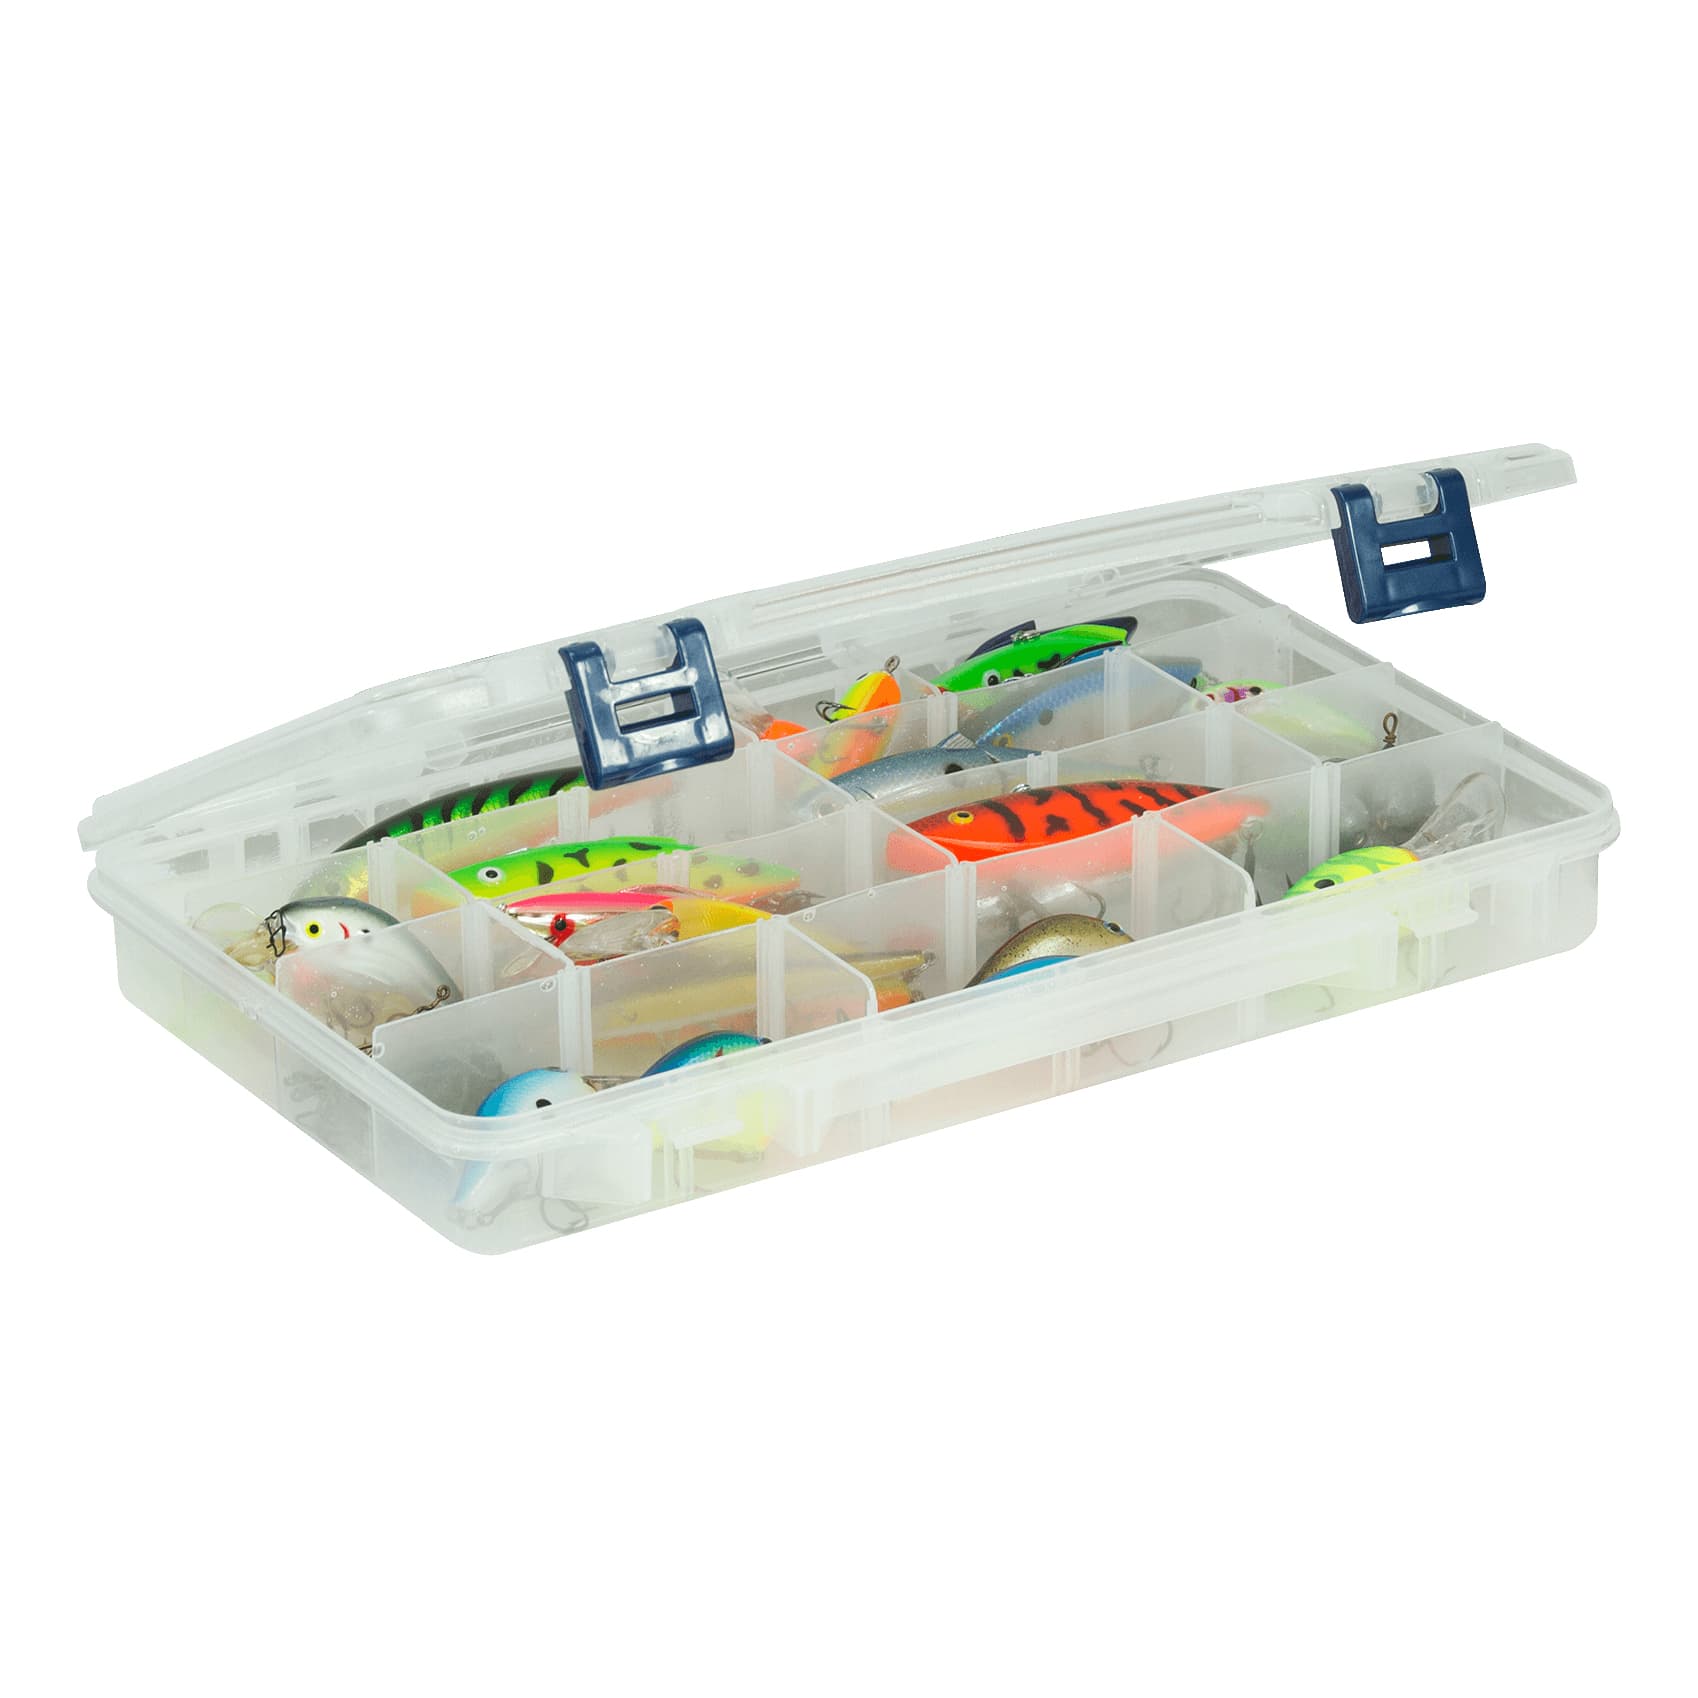 4-By™ 3700 Stowaway Rack System Tackle Box